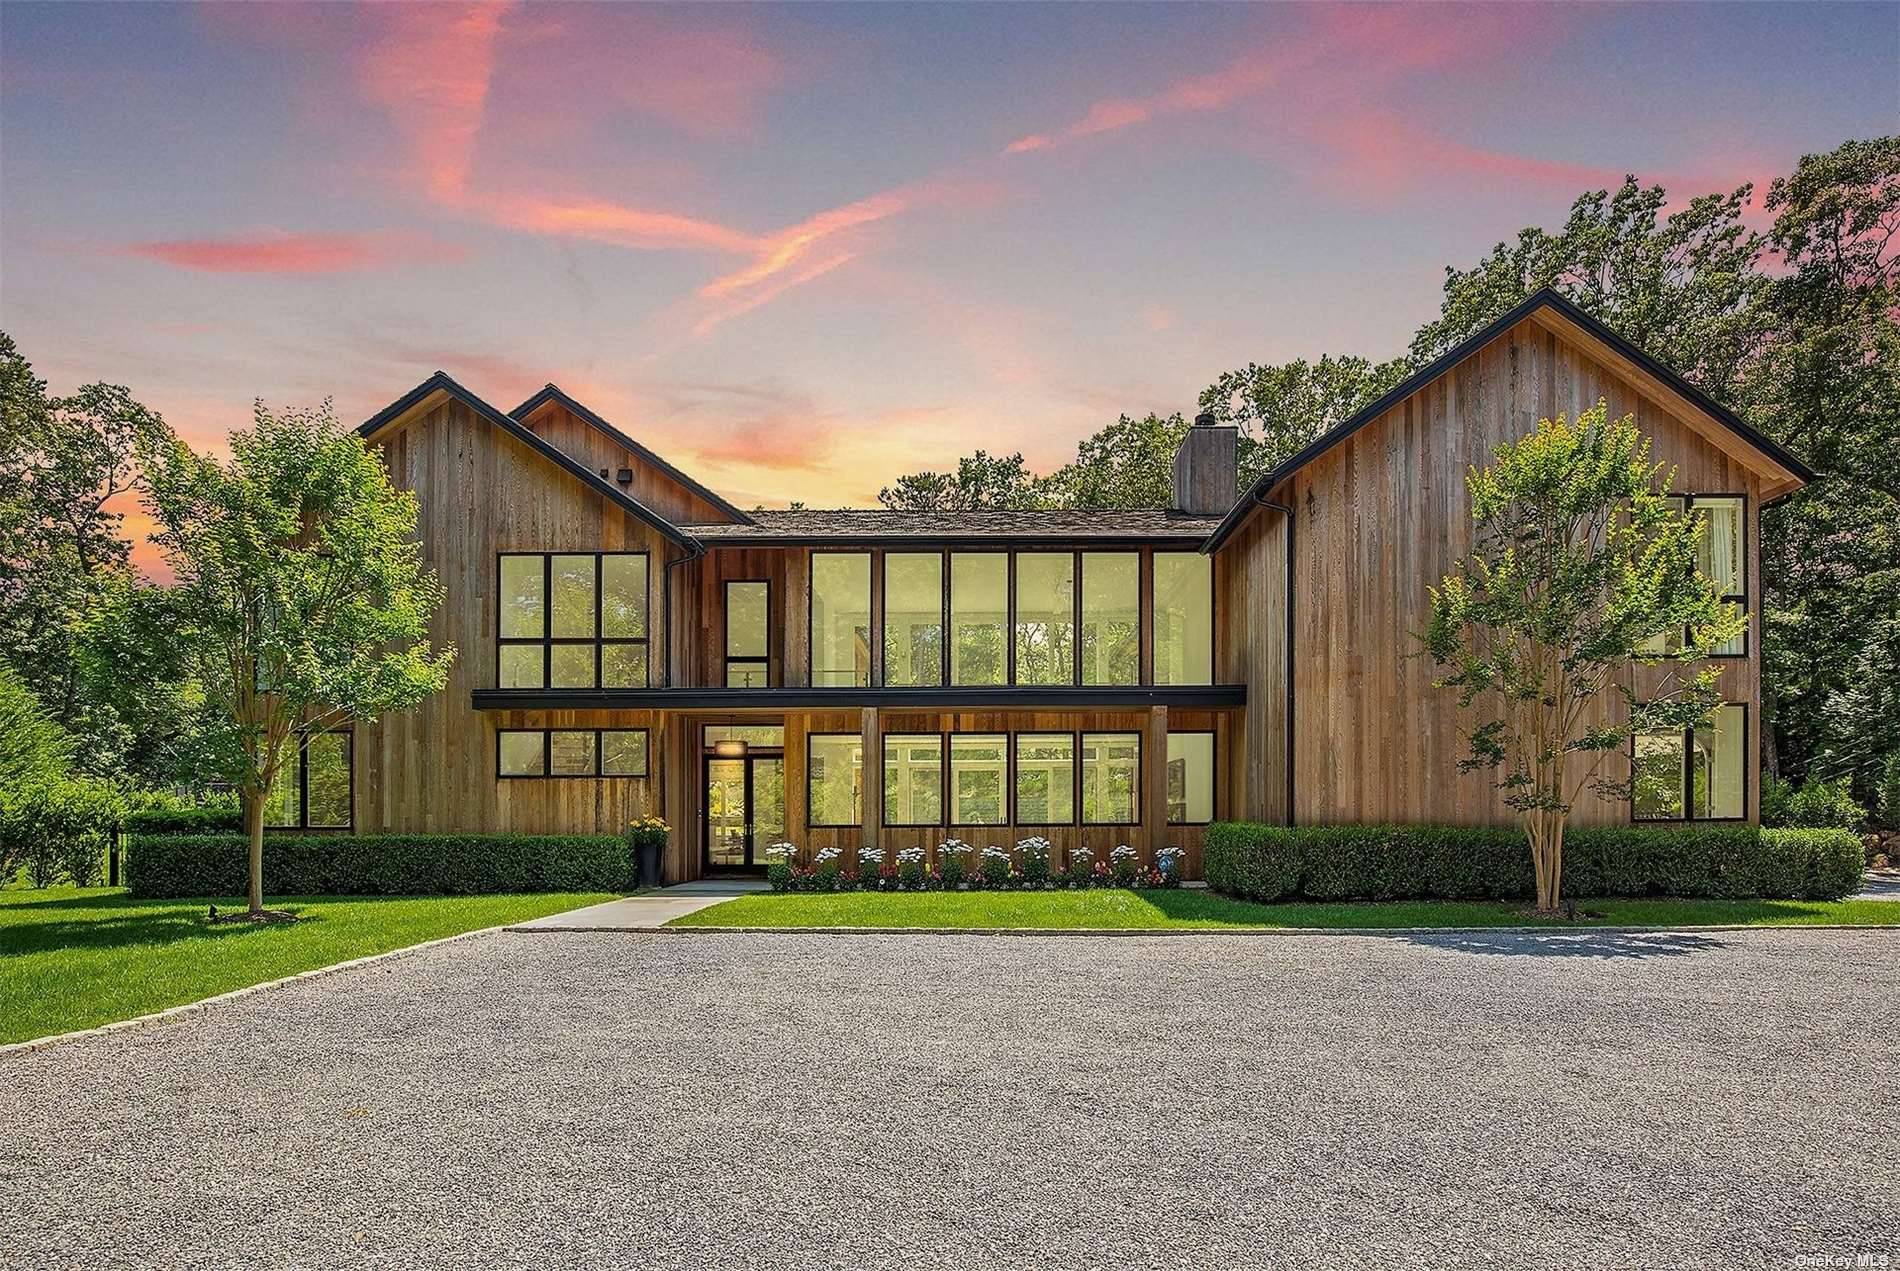 this magnificent home boasts 5, 612 SF of living space, 7 bedrooms and 7.